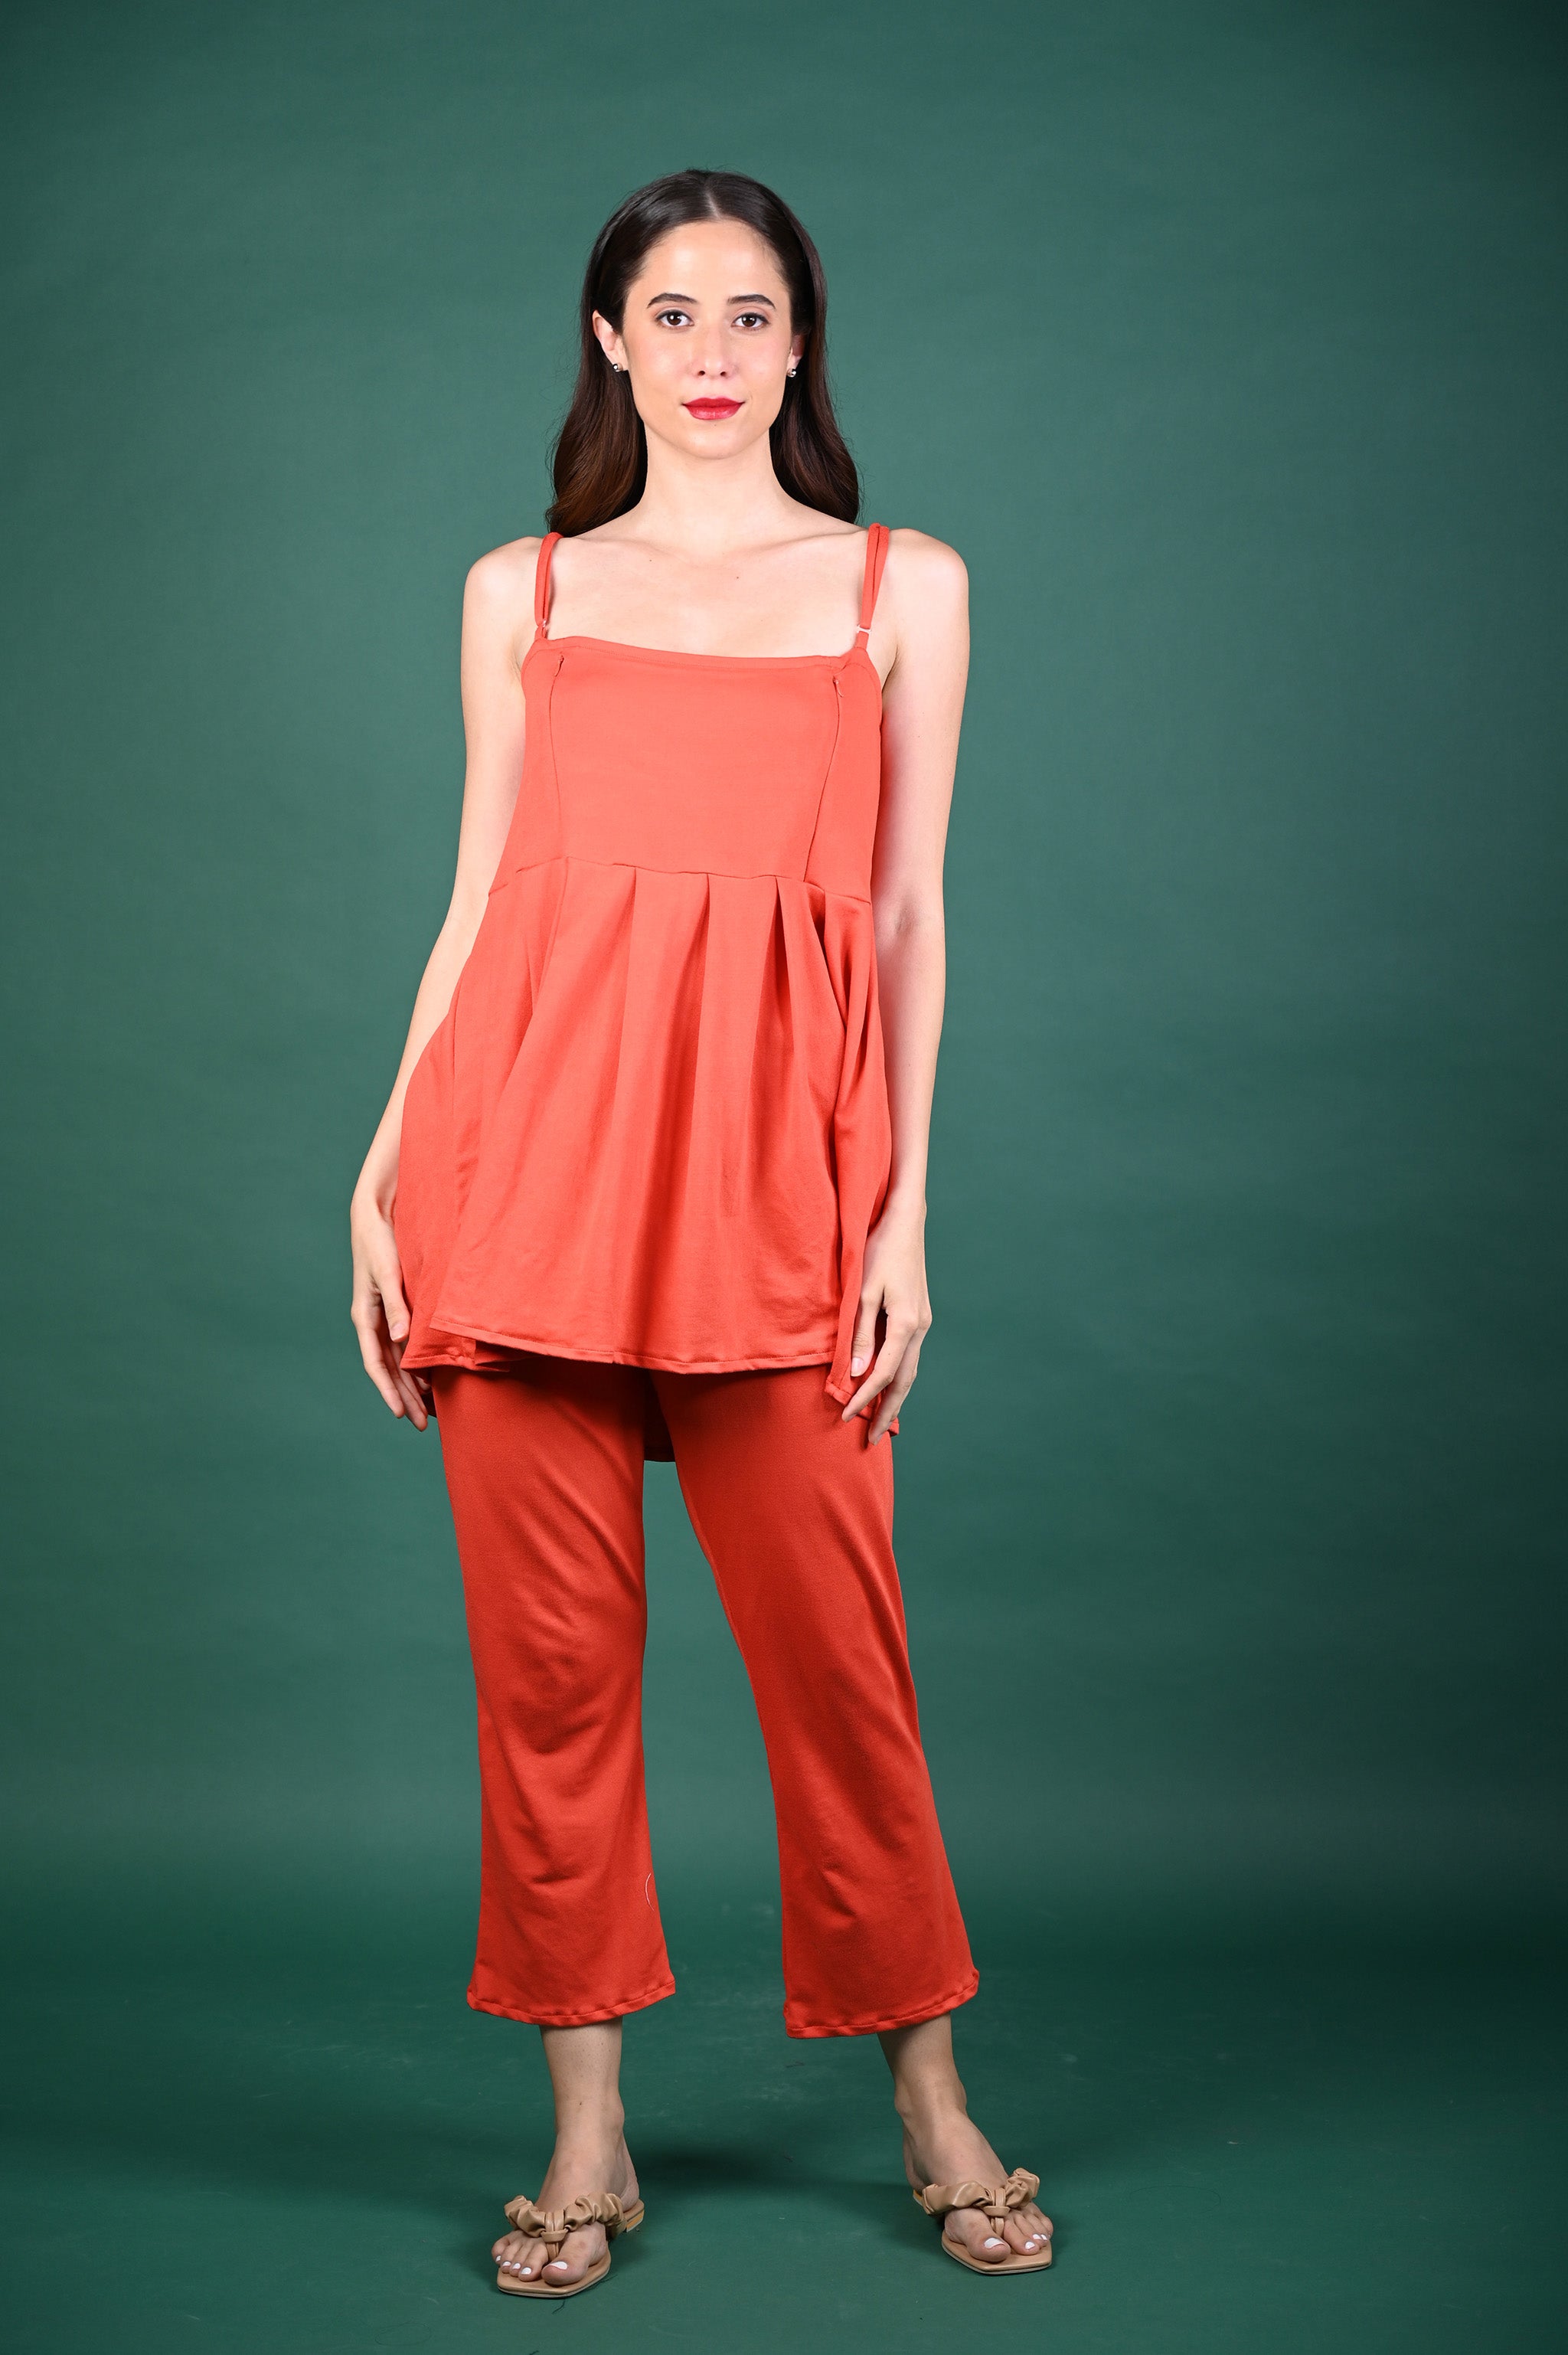 Special Prices: Jetje Comfy Top and Pants Set